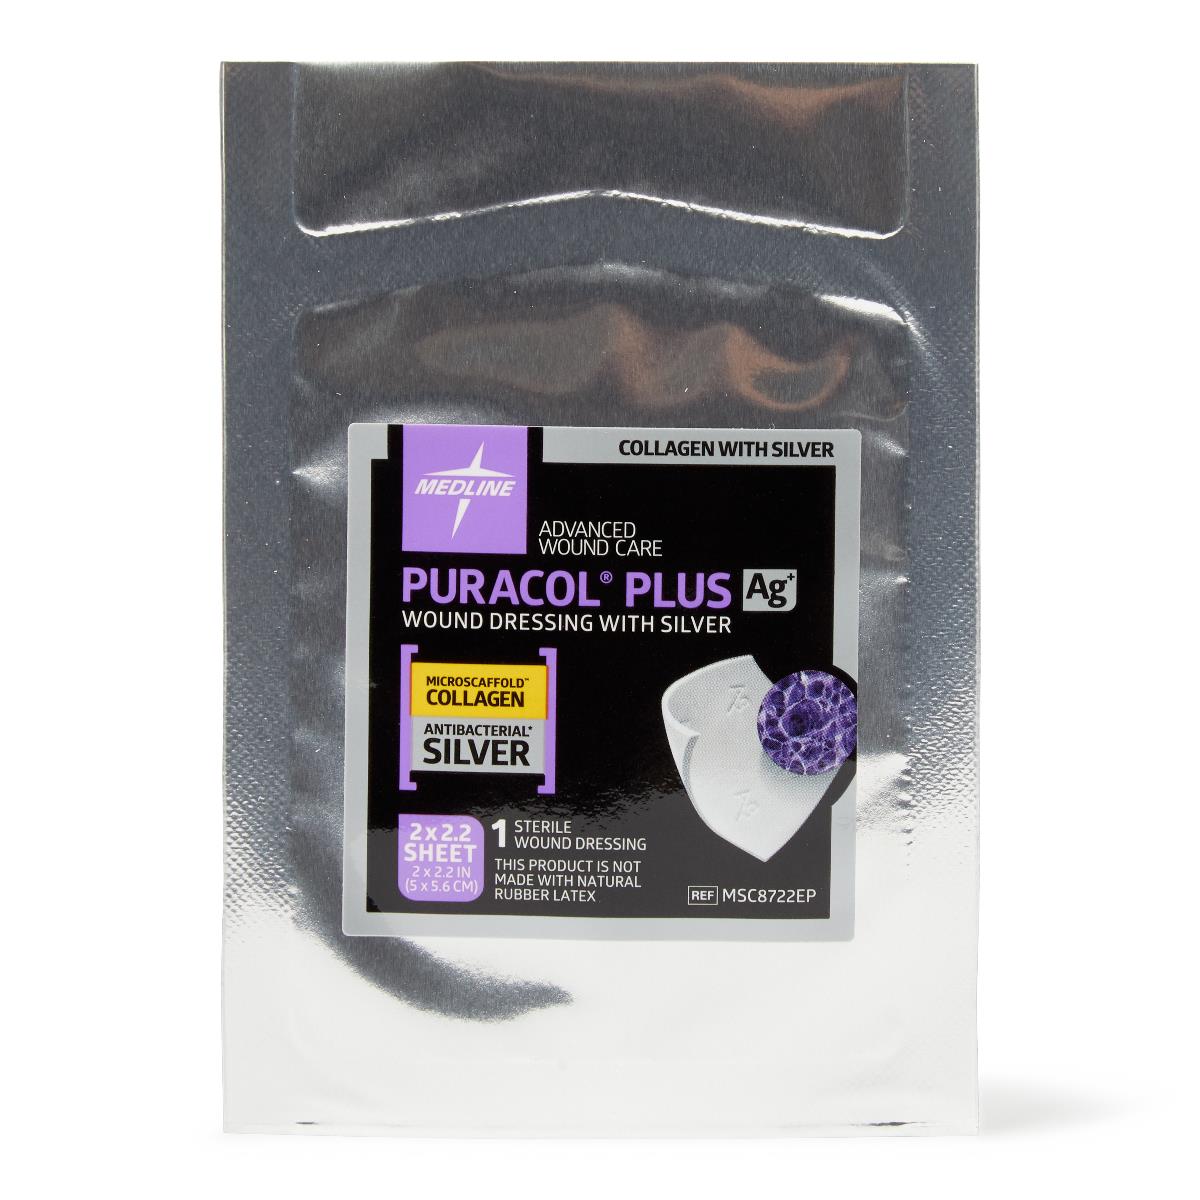 Puracol Plus Collagen Dressings, 2x2in (Box of 10)